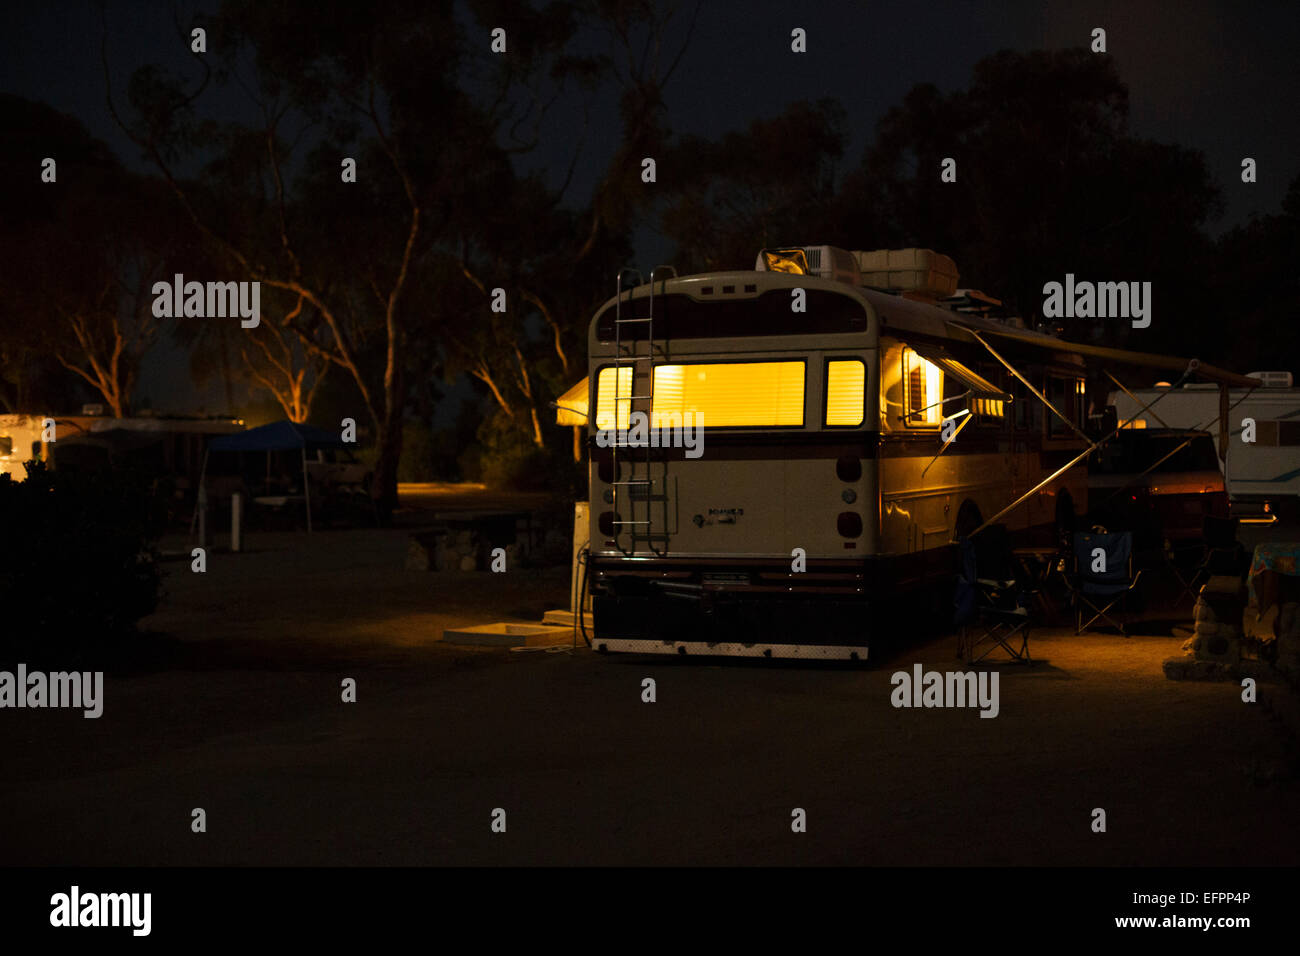 Recreational vehicle on campsite at night, San Clemente, California, USA Stock Photo